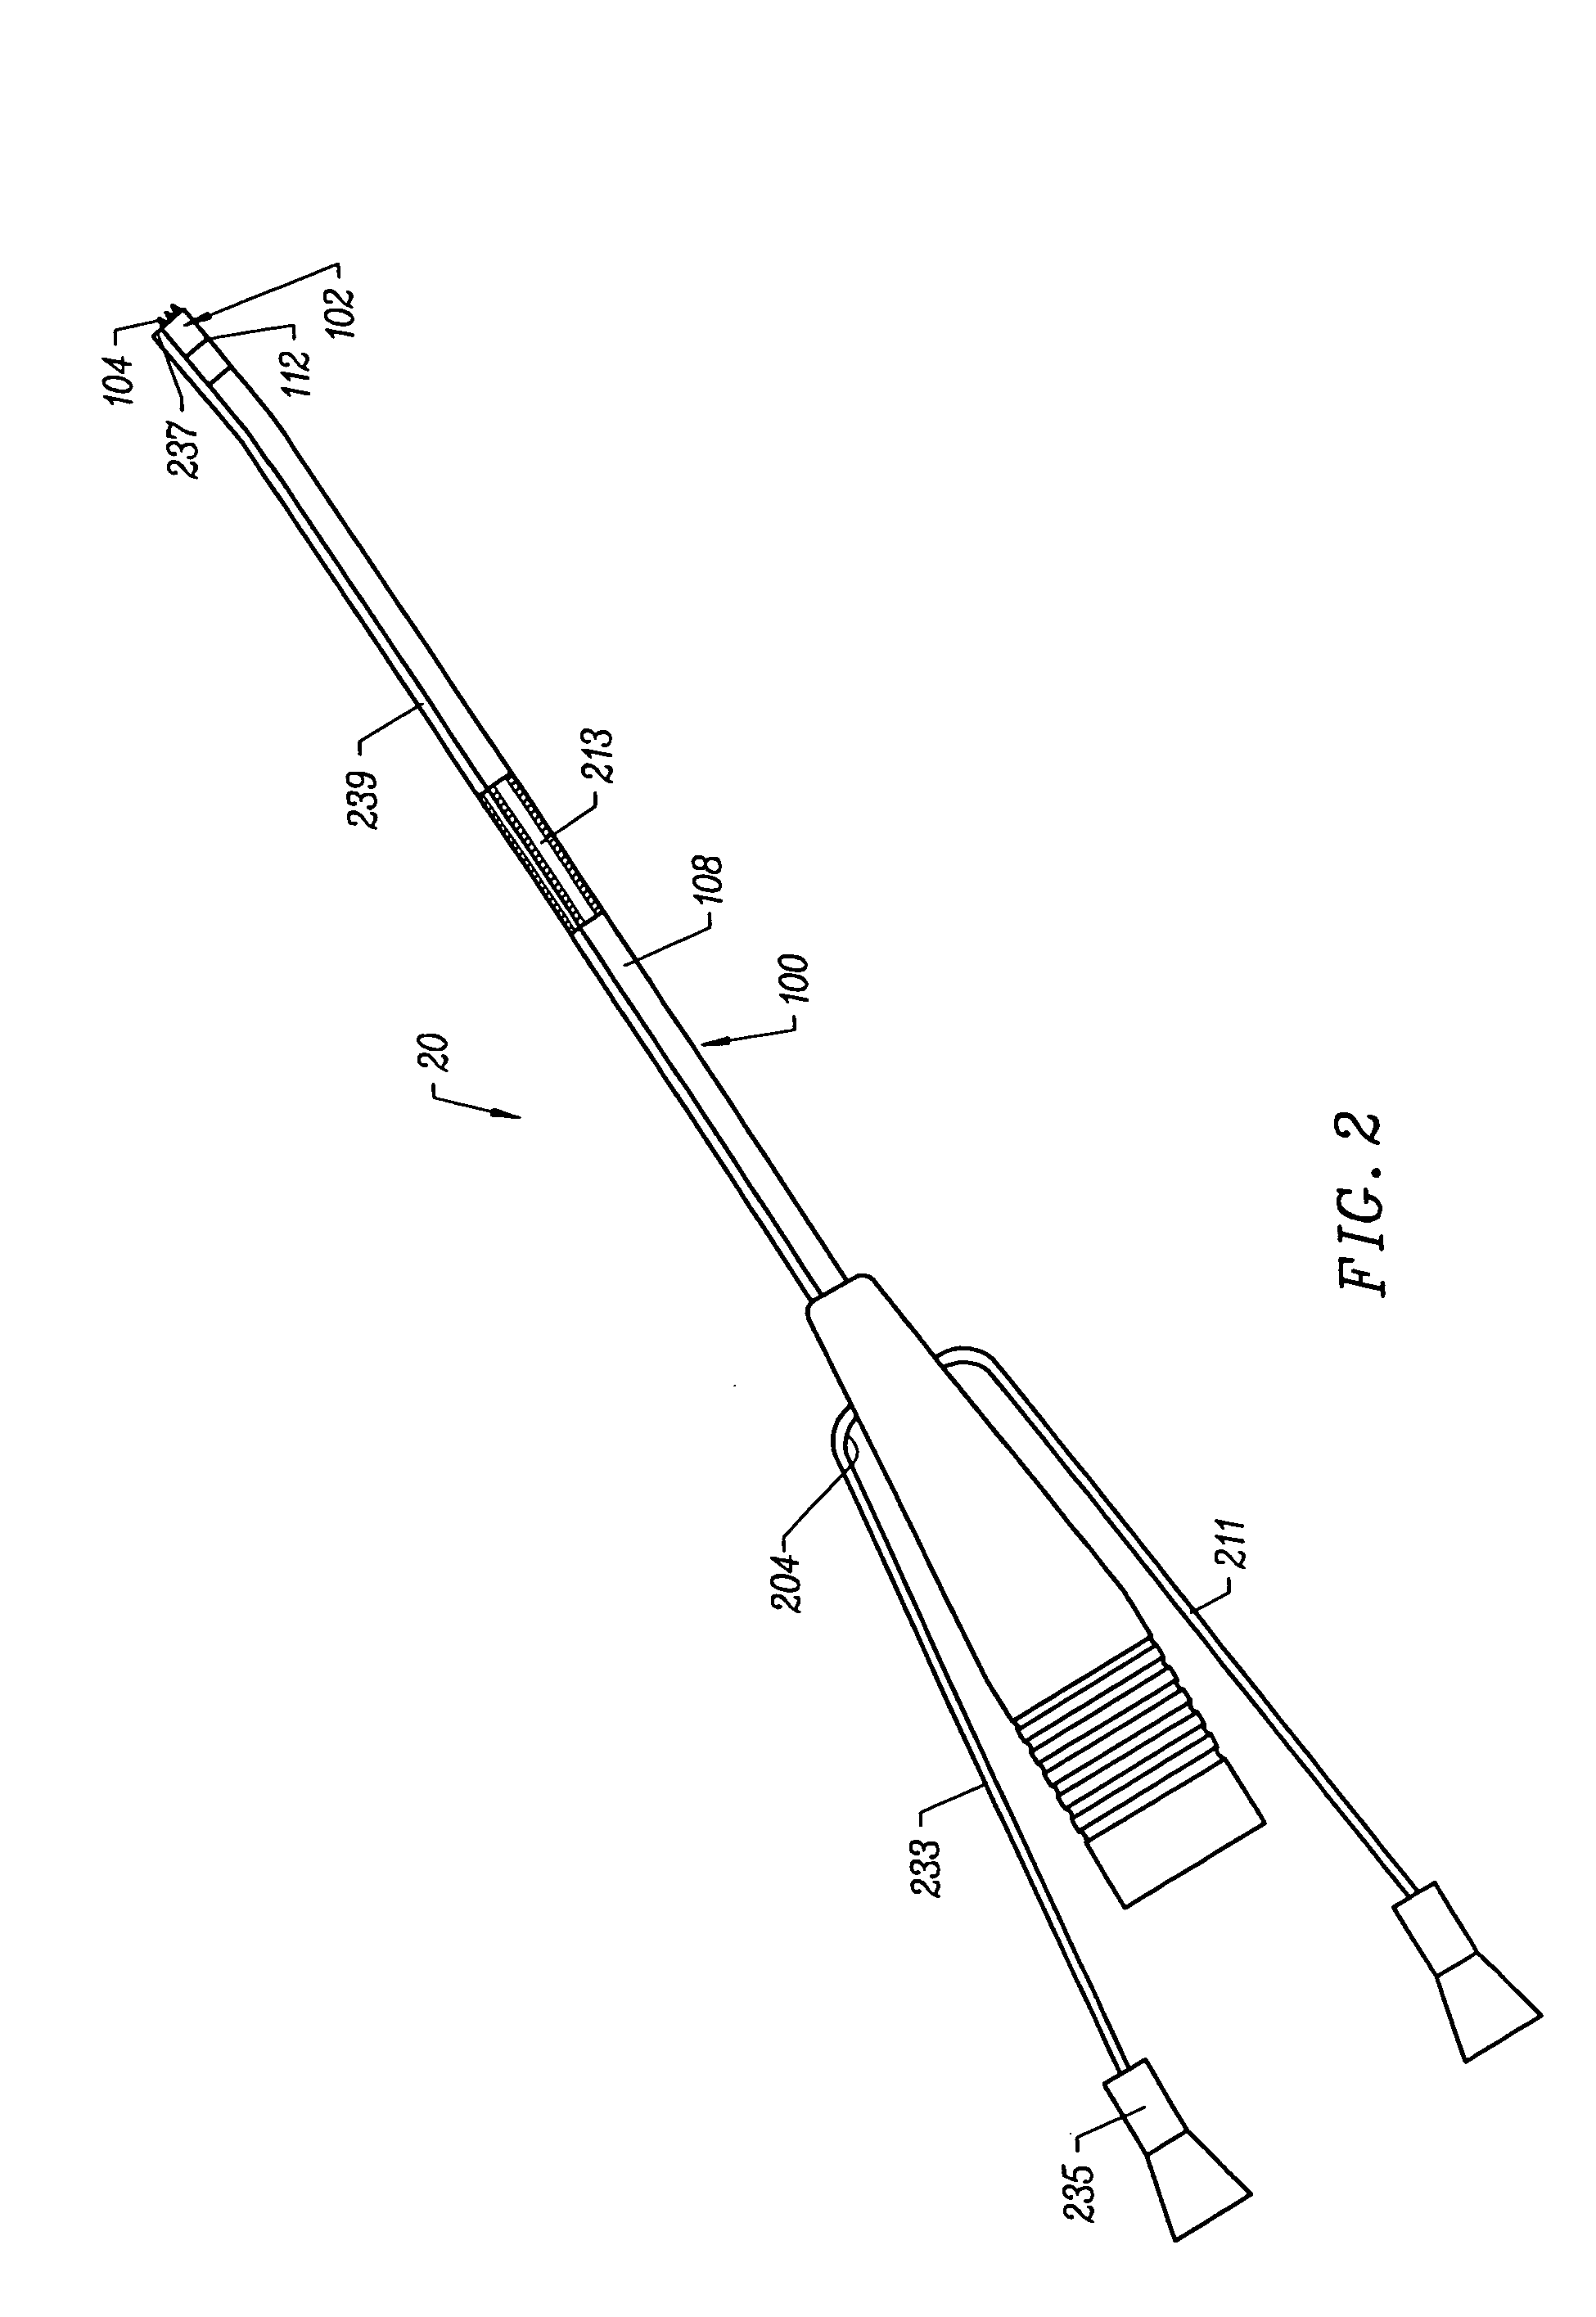 Systems and methods for electrosurgery